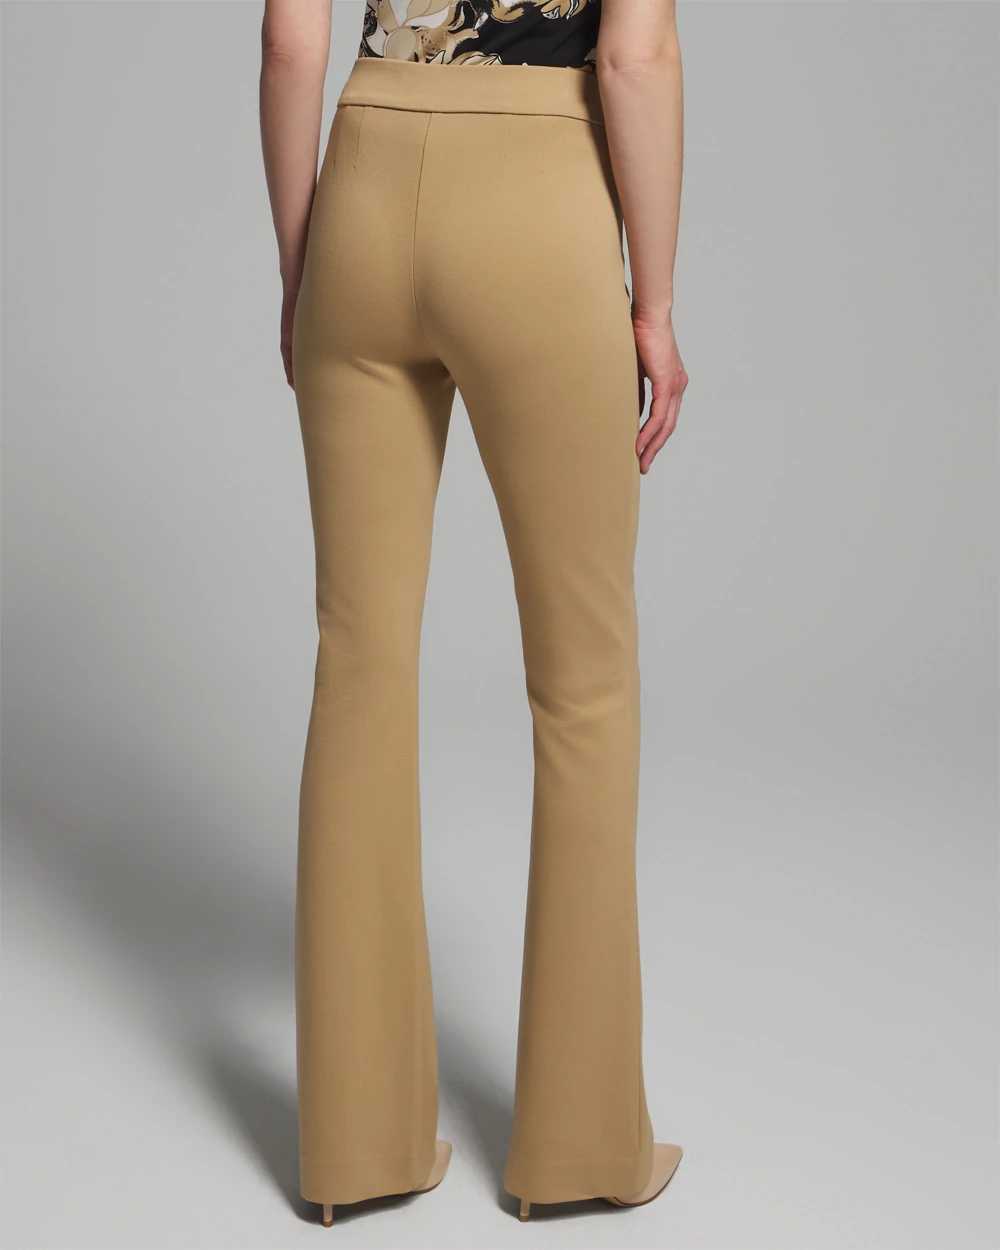 Outlet WHBM Pull-On Skinny Flare Pant click to view larger image.